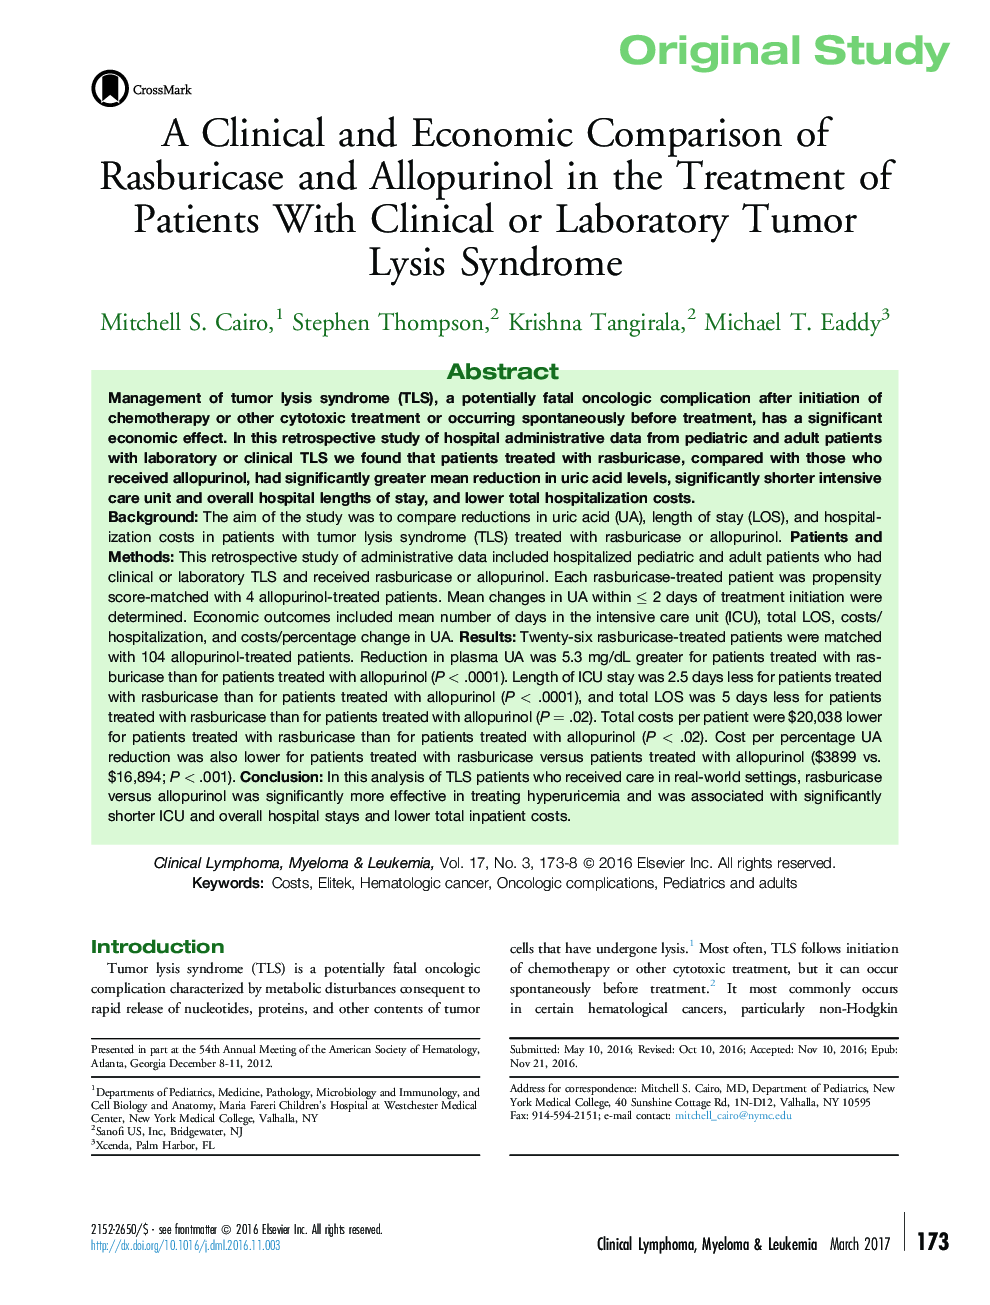 Original StudyA Clinical and Economic Comparison of Rasburicase and Allopurinol in the Treatment of Patients With Clinical or Laboratory Tumor LysisÂ Syndrome